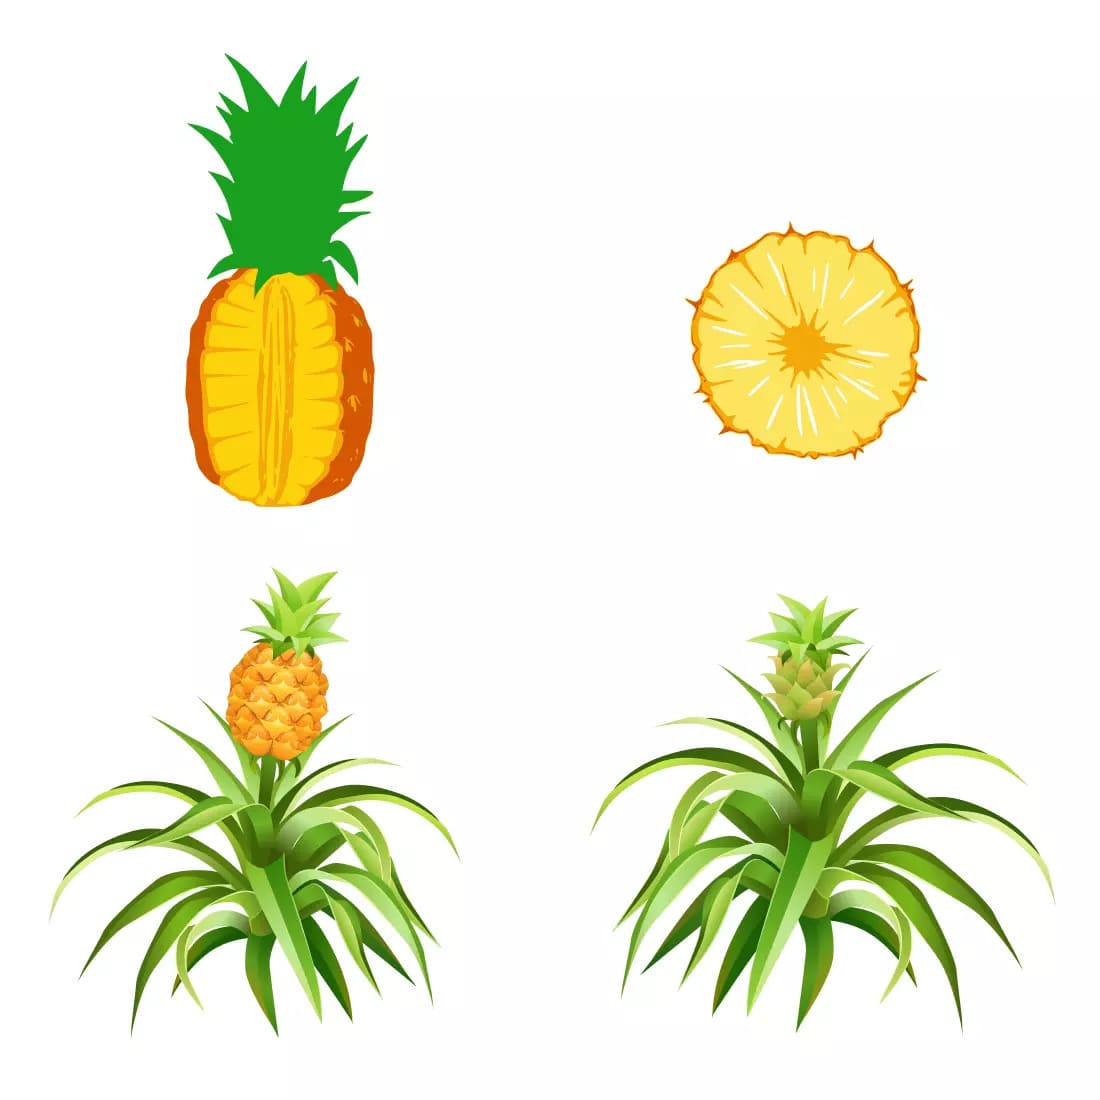 Pineapple SVG Bundle Preview 4.